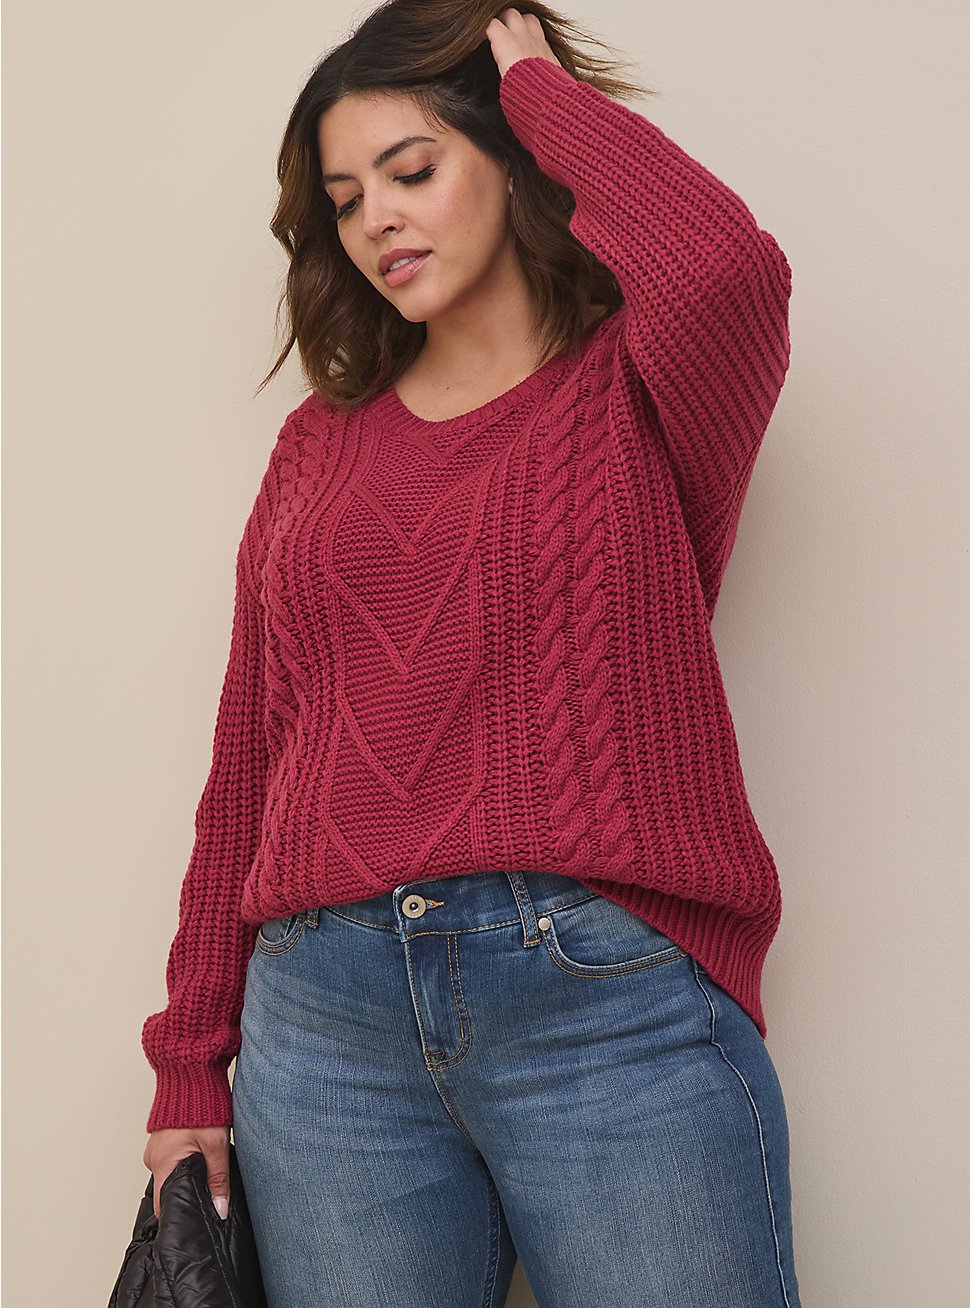 Cable Pullover Tie Back Sweater, RED, hi-res